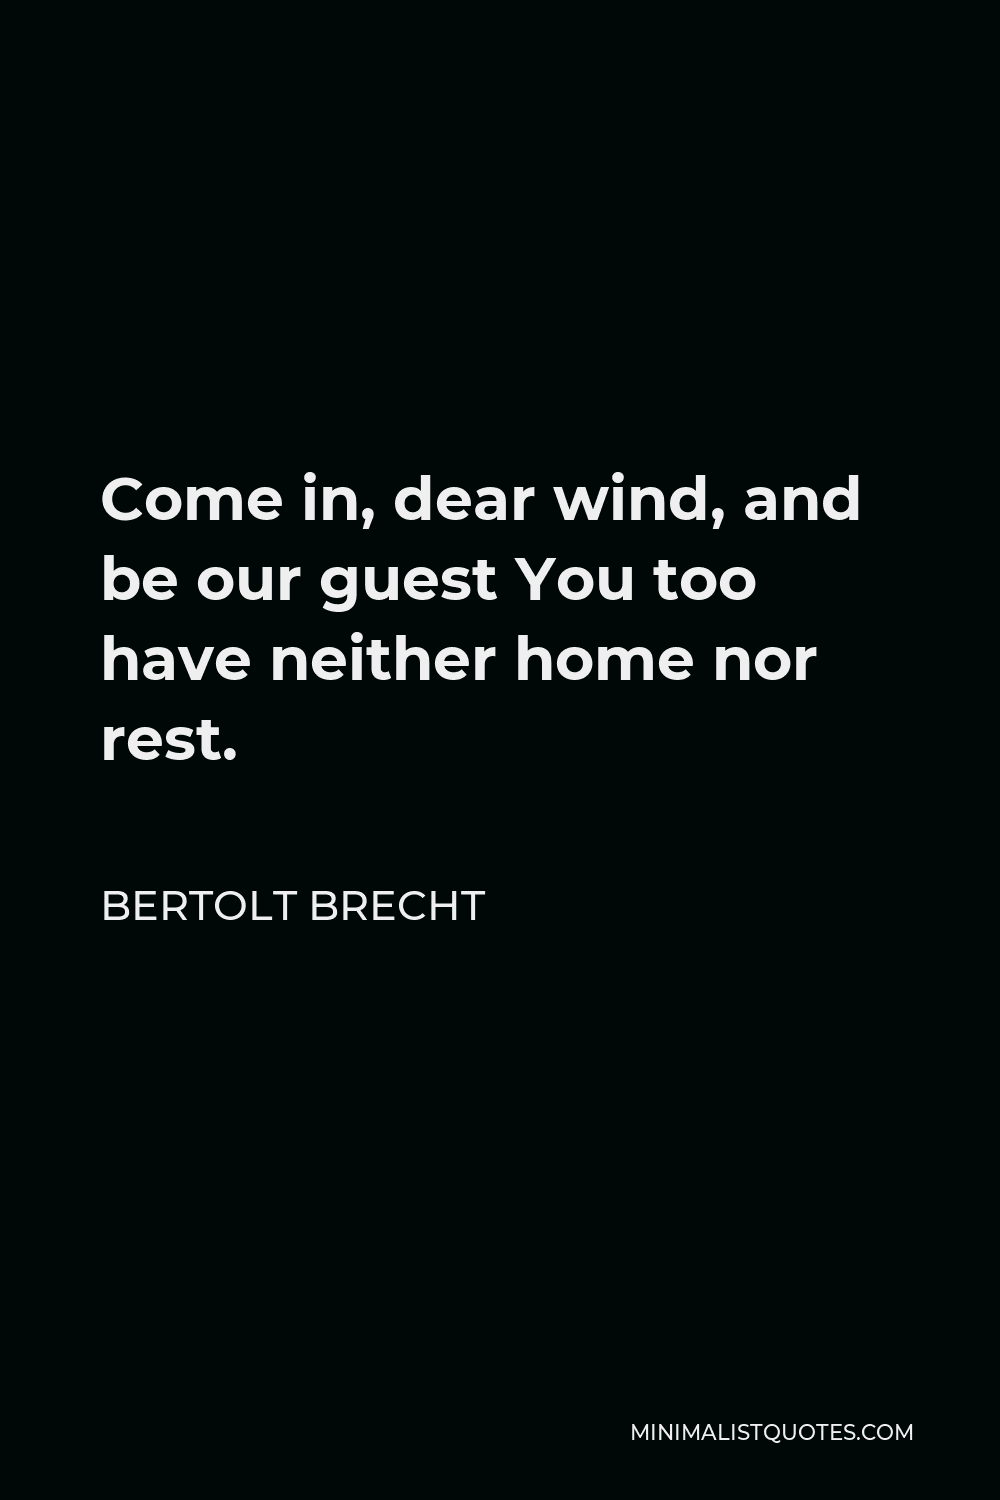 Bertolt Brecht Quote - Come in, dear wind, and be our guest You too have neither home nor rest.